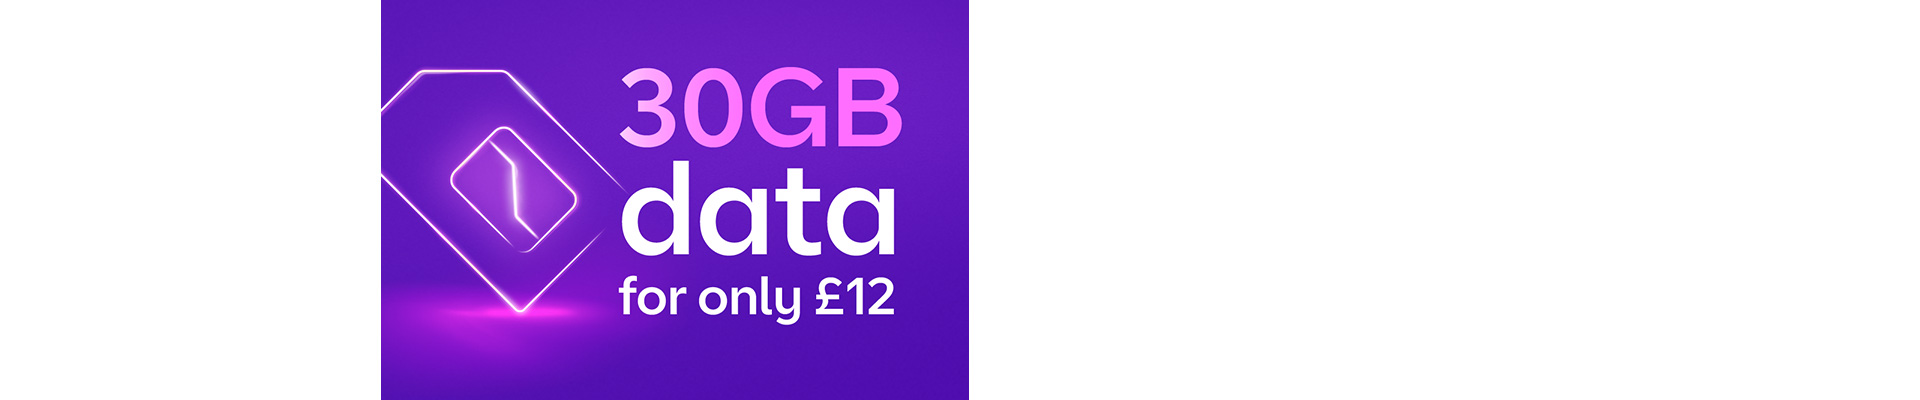 30GB for £12 for BT Broadband customers